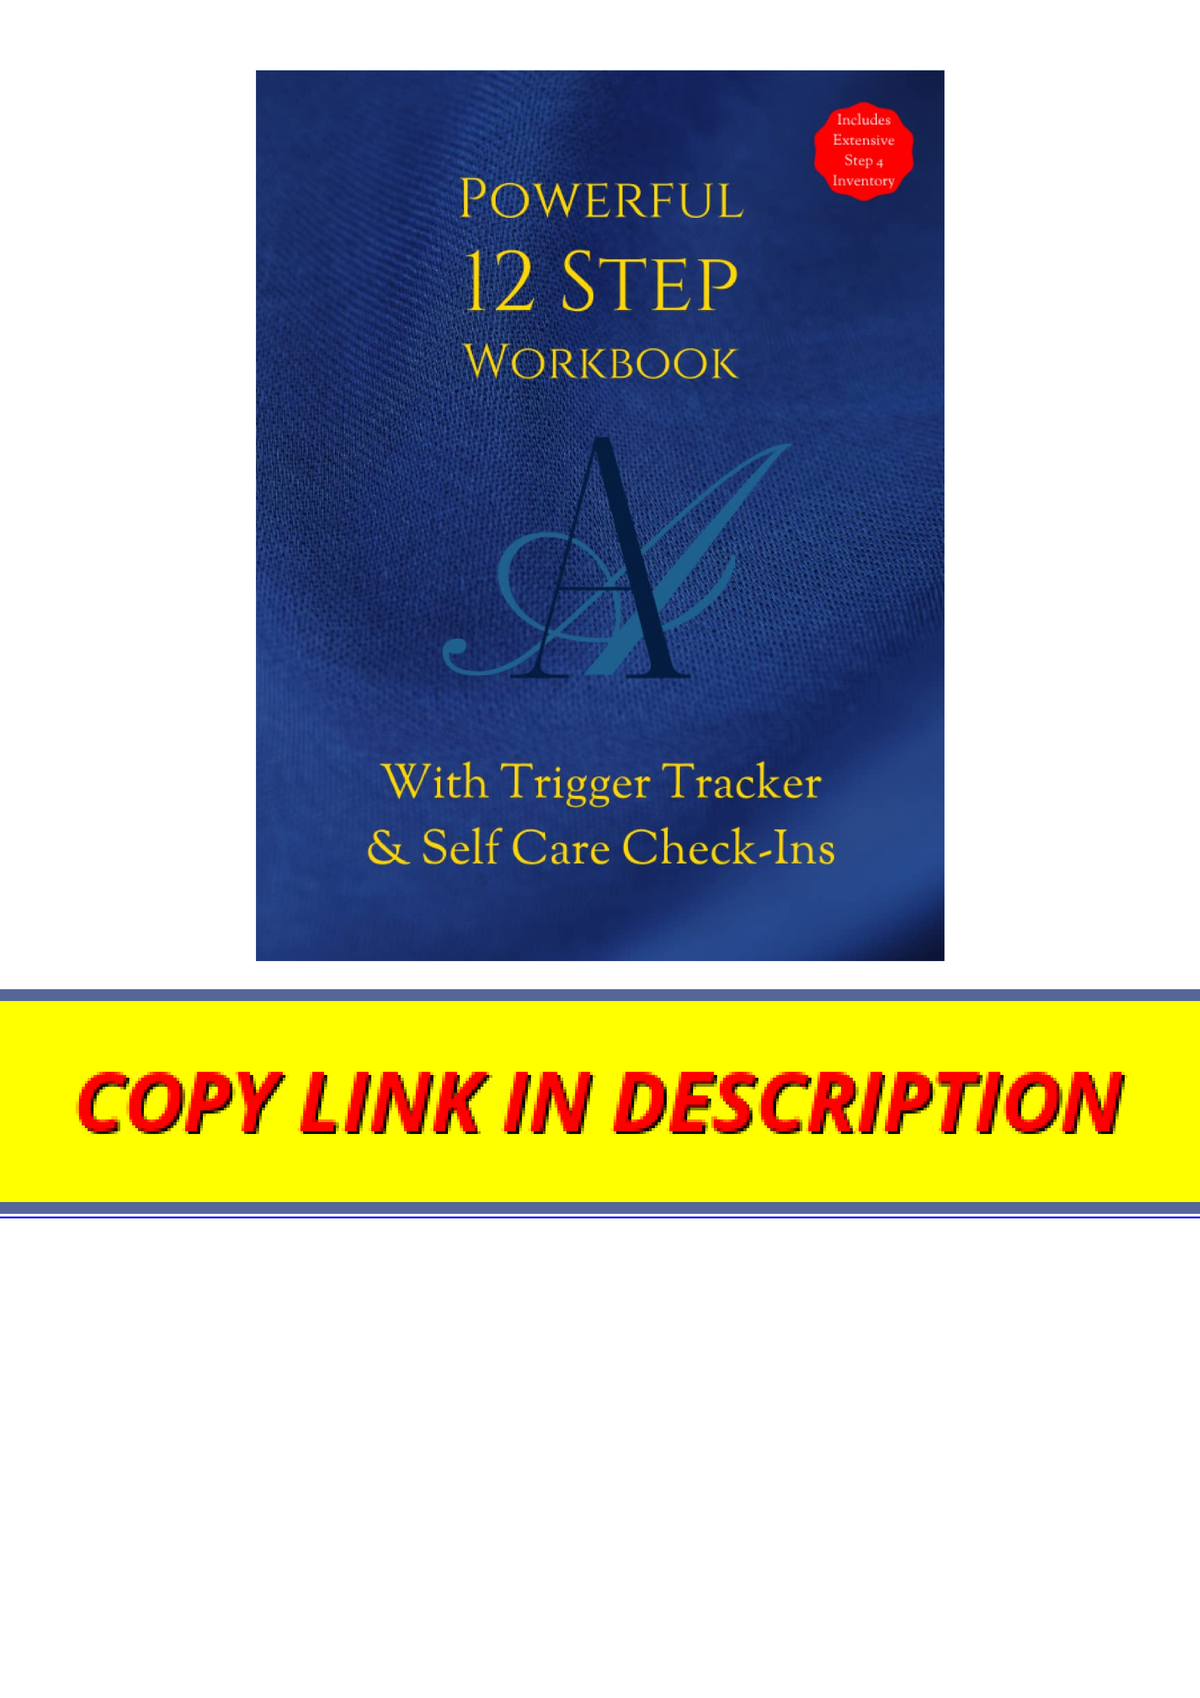 Ebook download AA POWERFUL 12 STEP WORKBOOK With TRIGGER TRACKER and ...